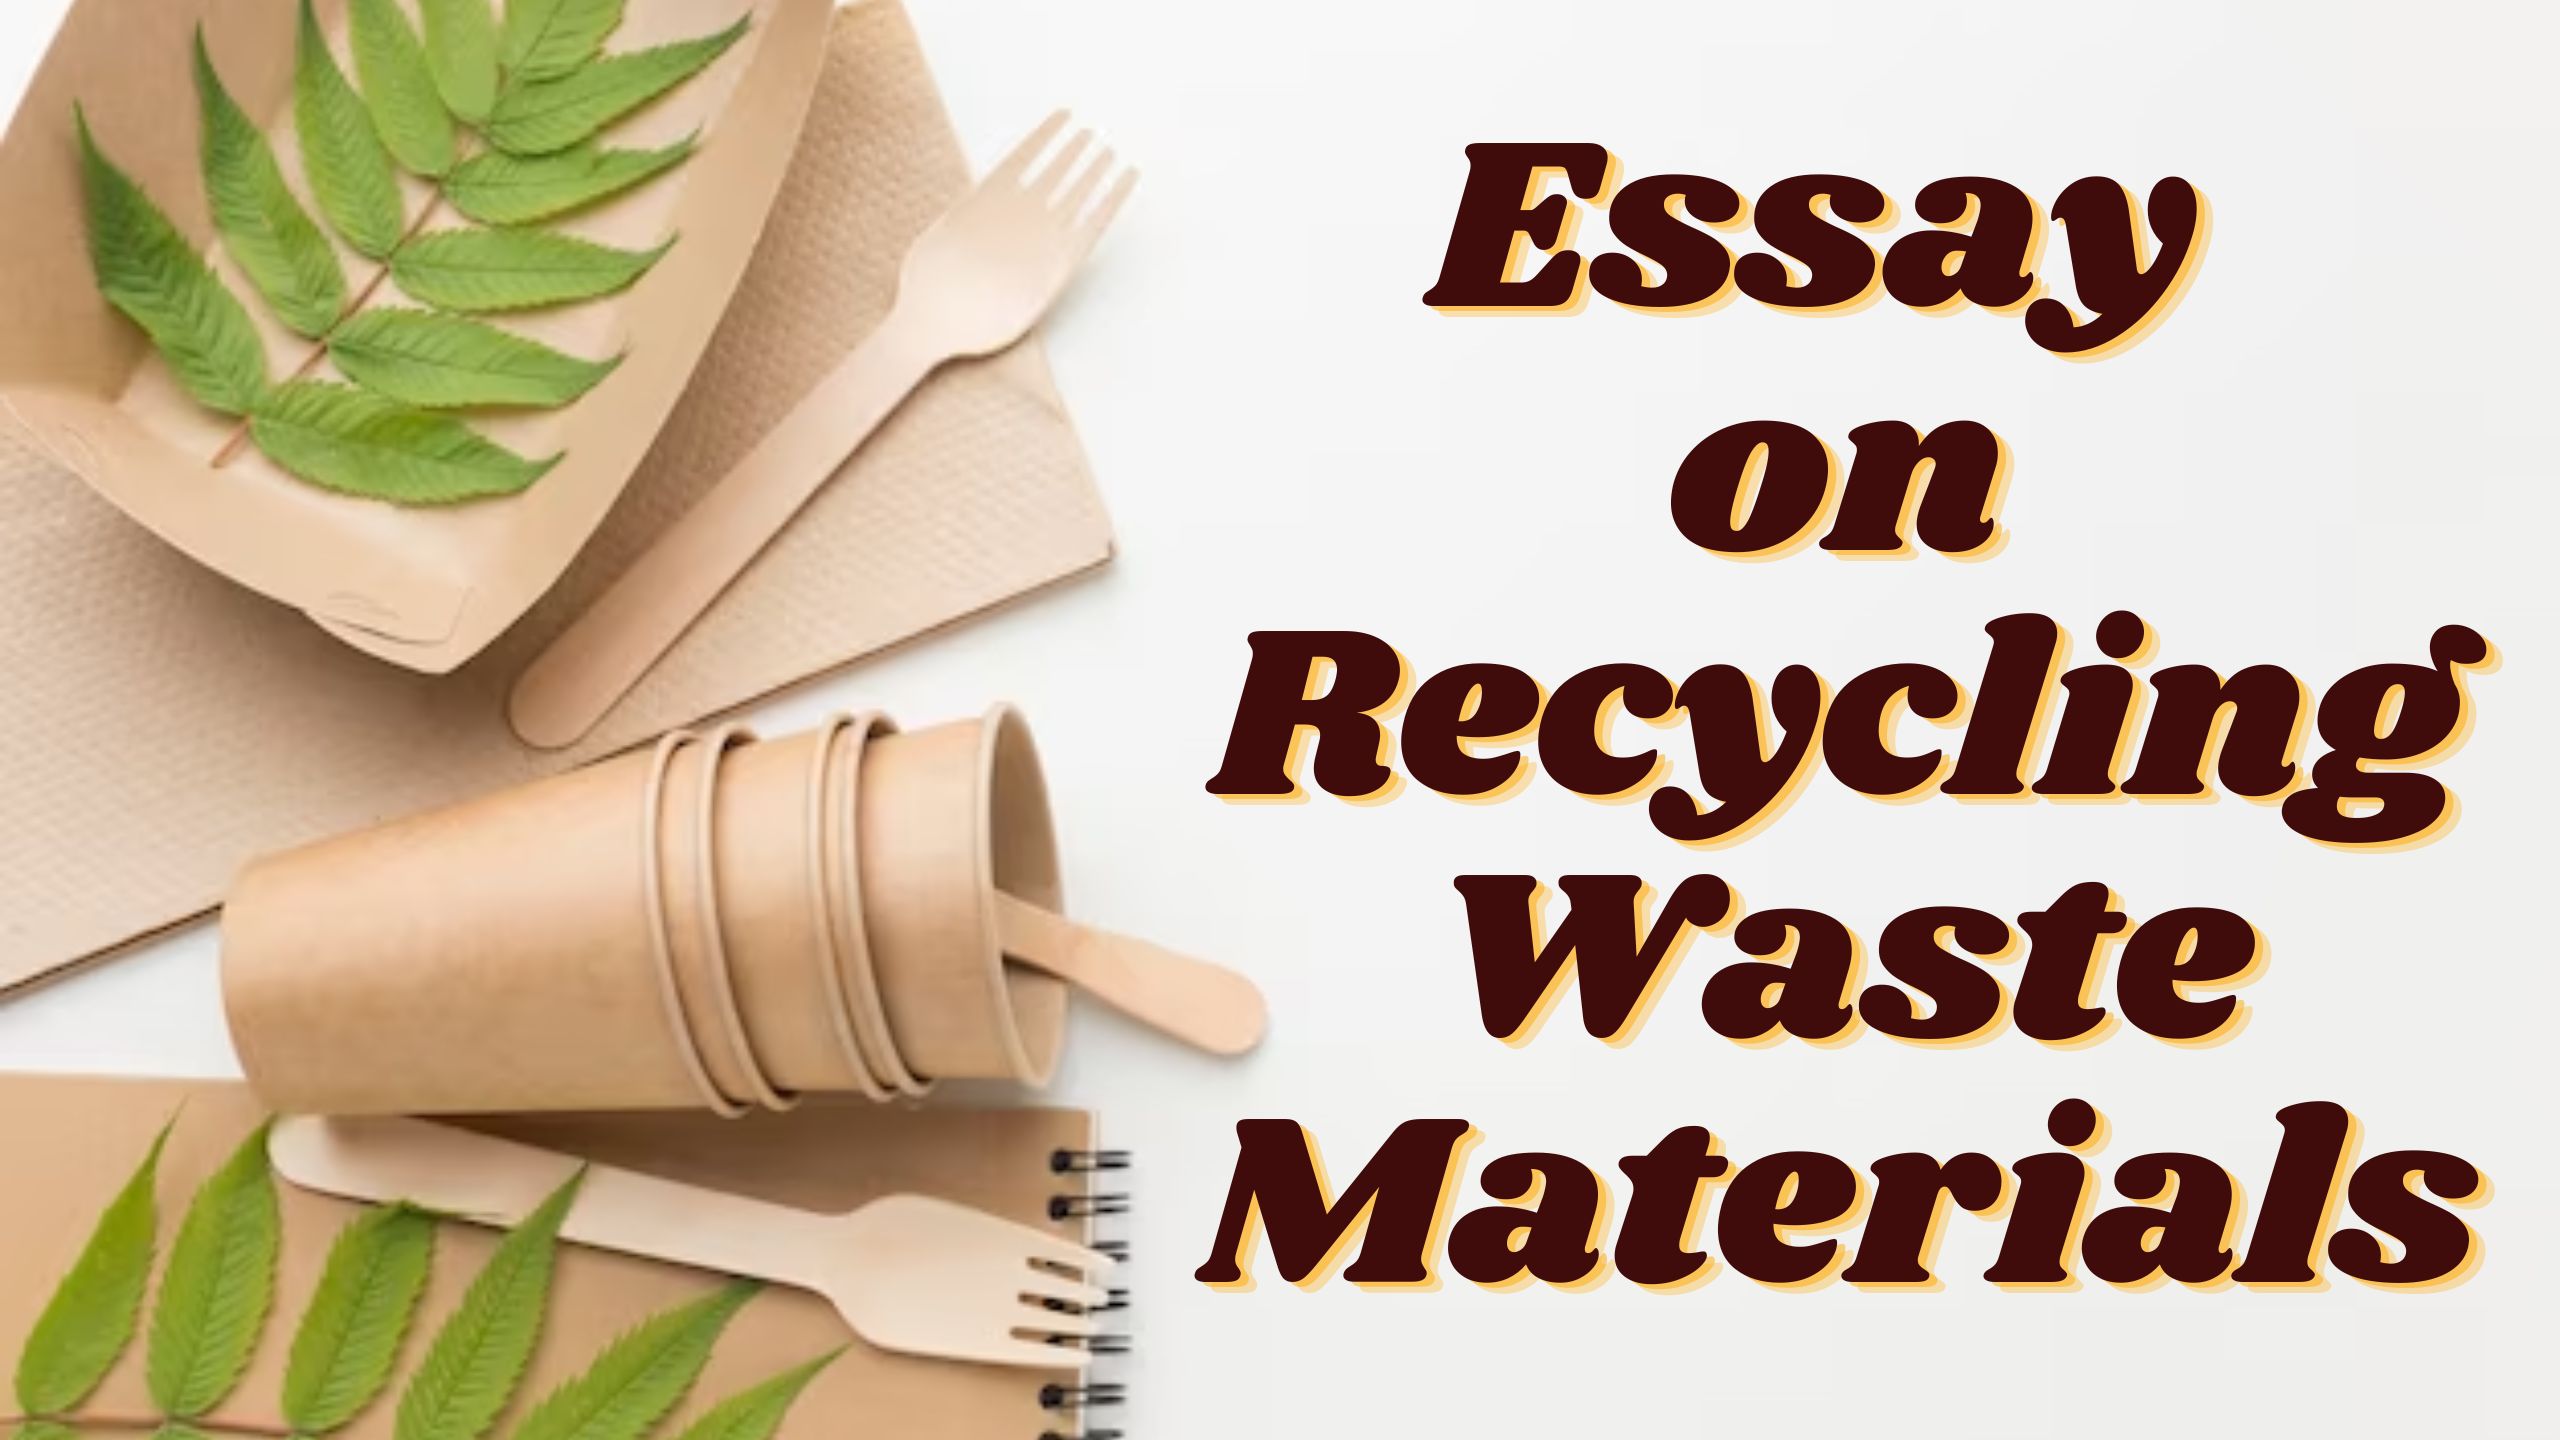 Essay Recycling Waste Materials for Students and Children